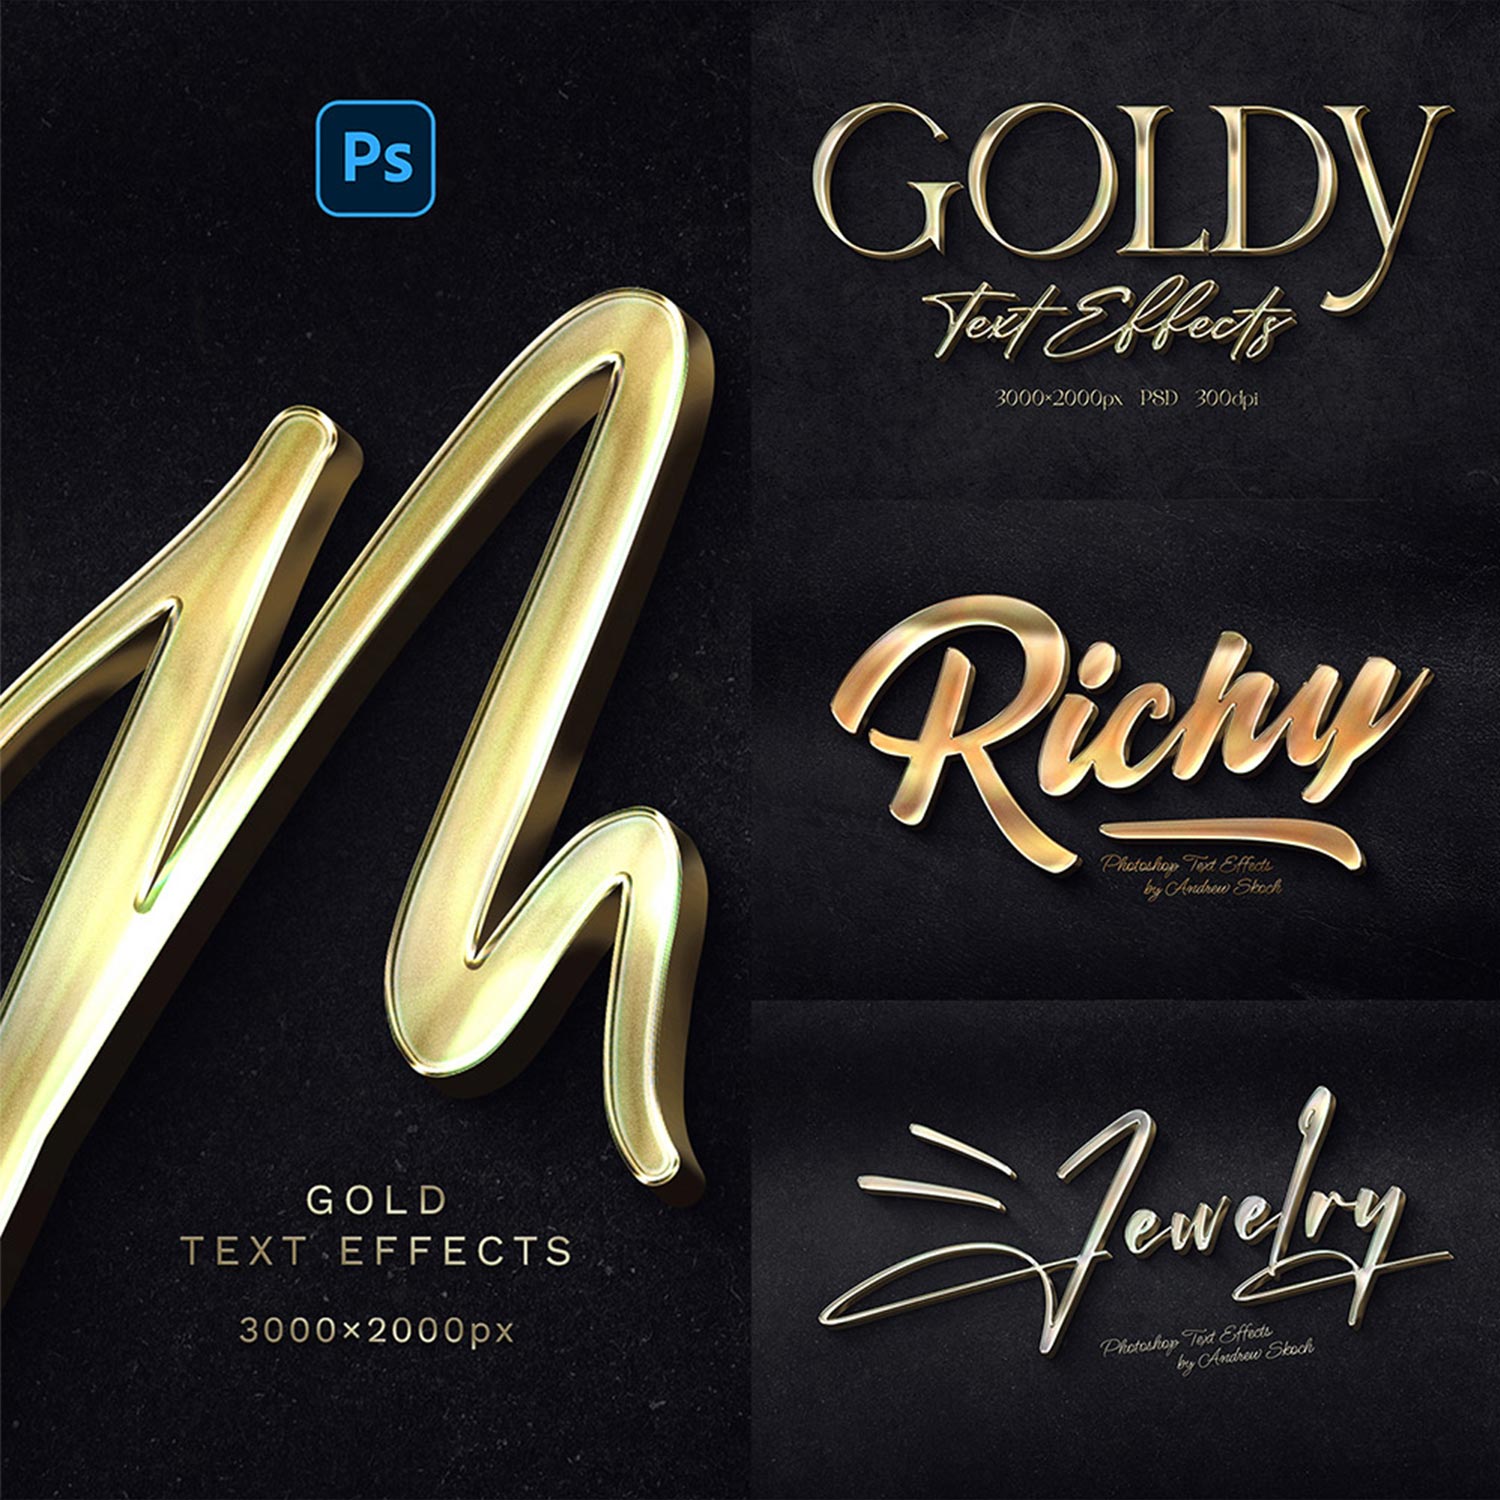 Gold Text Effects cover image.